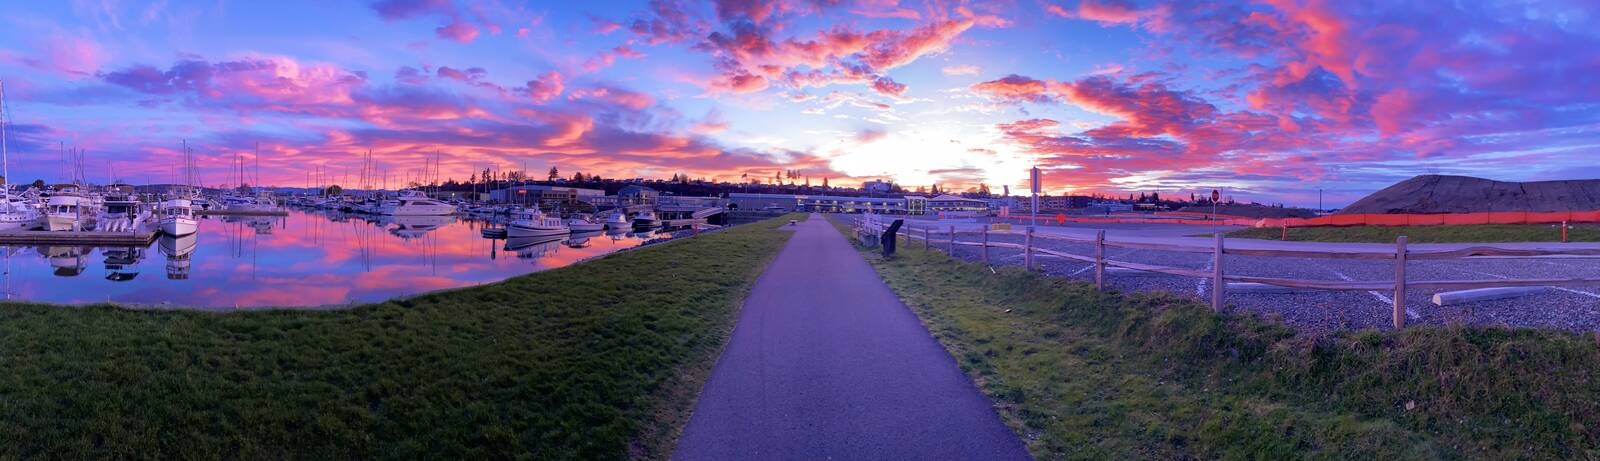 Image of Everett Waterfront by Steve West